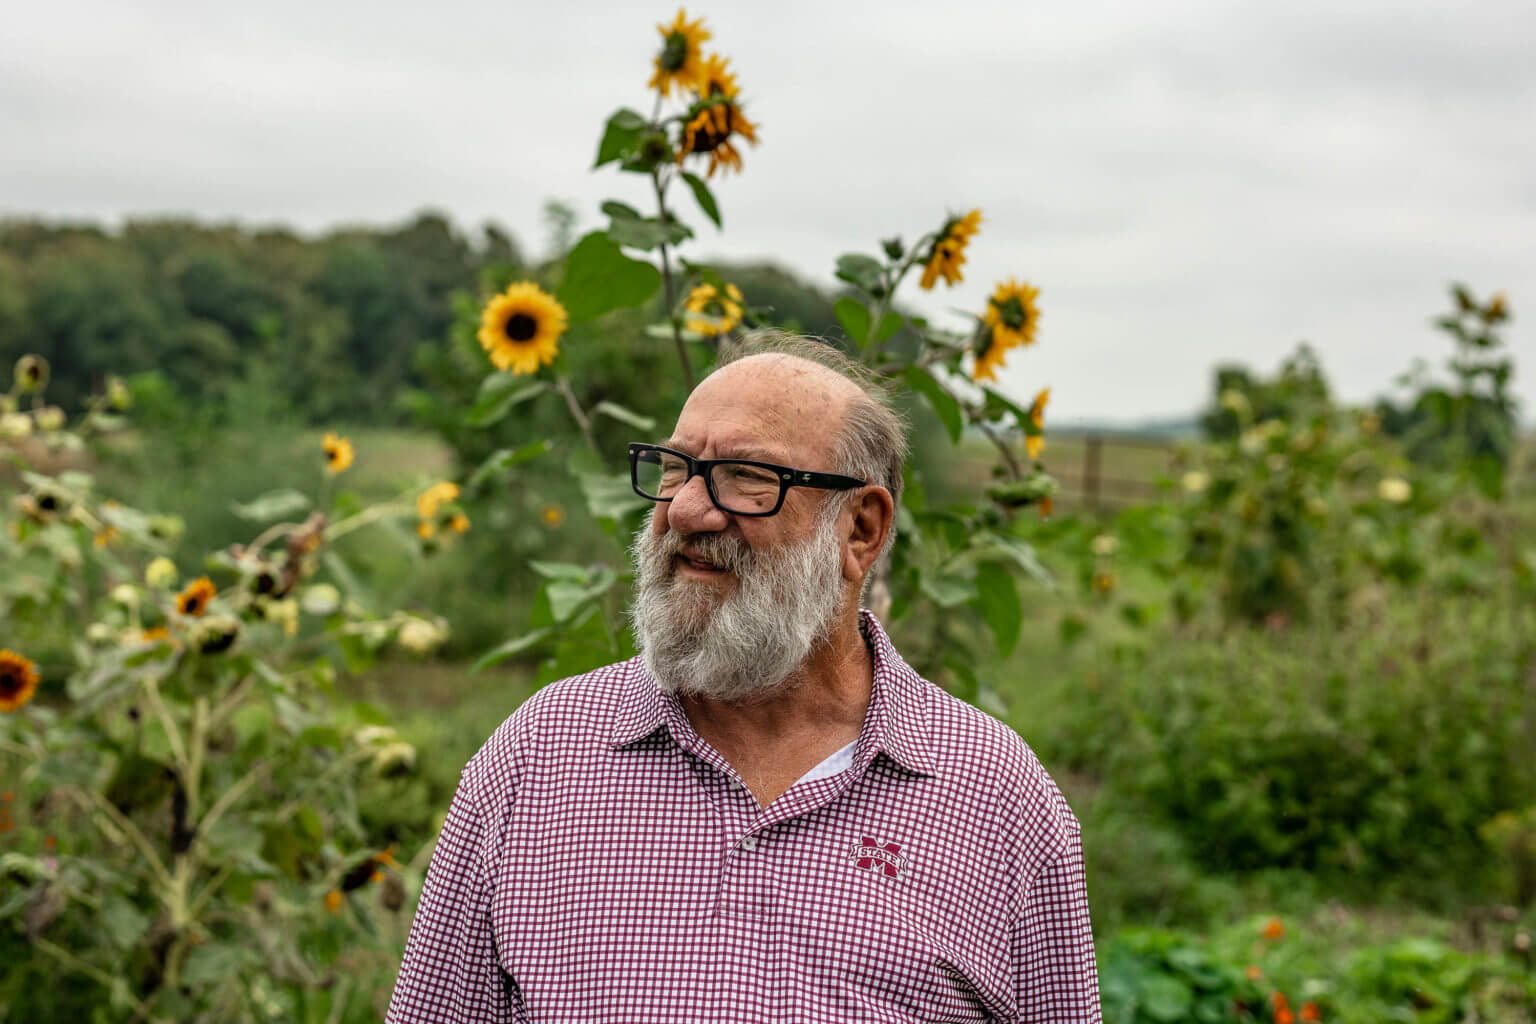 A man standing wearing glasses and a red plaid shirt in front of sunflowers. October 2020